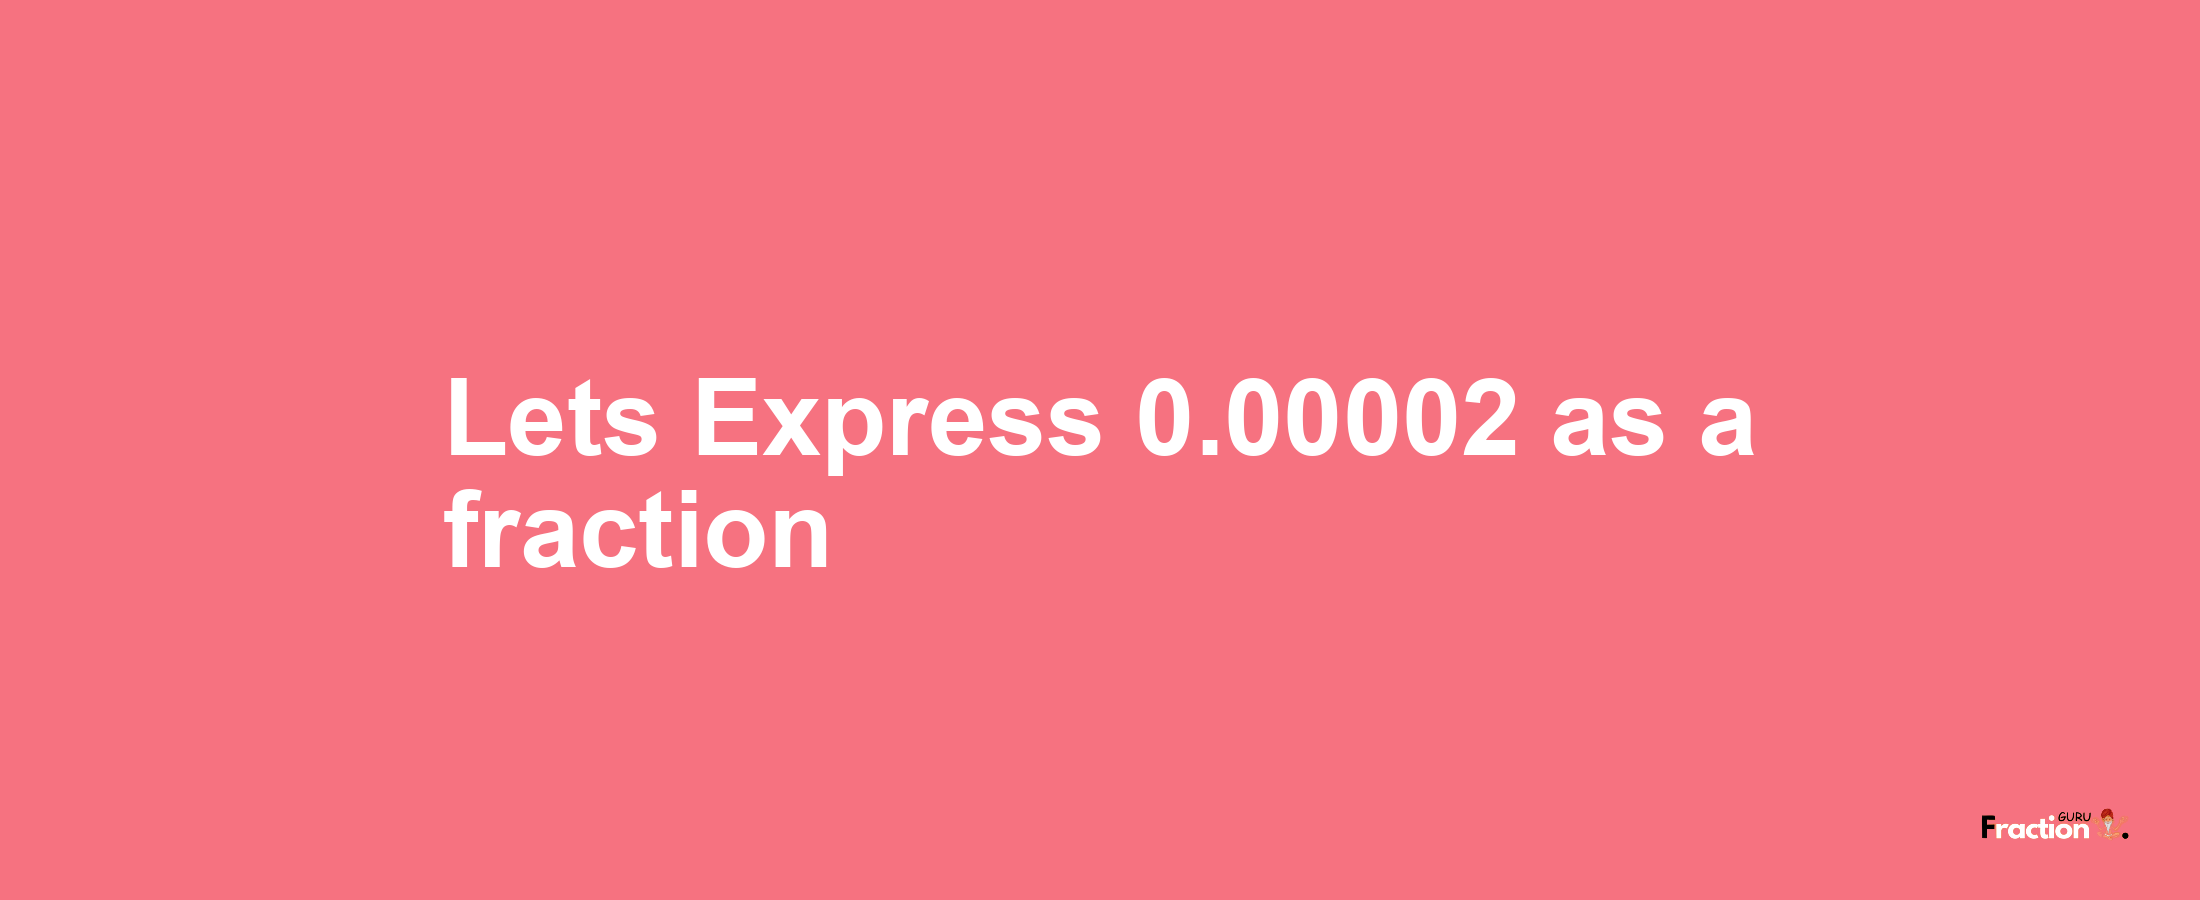 Lets Express 0.00002 as afraction